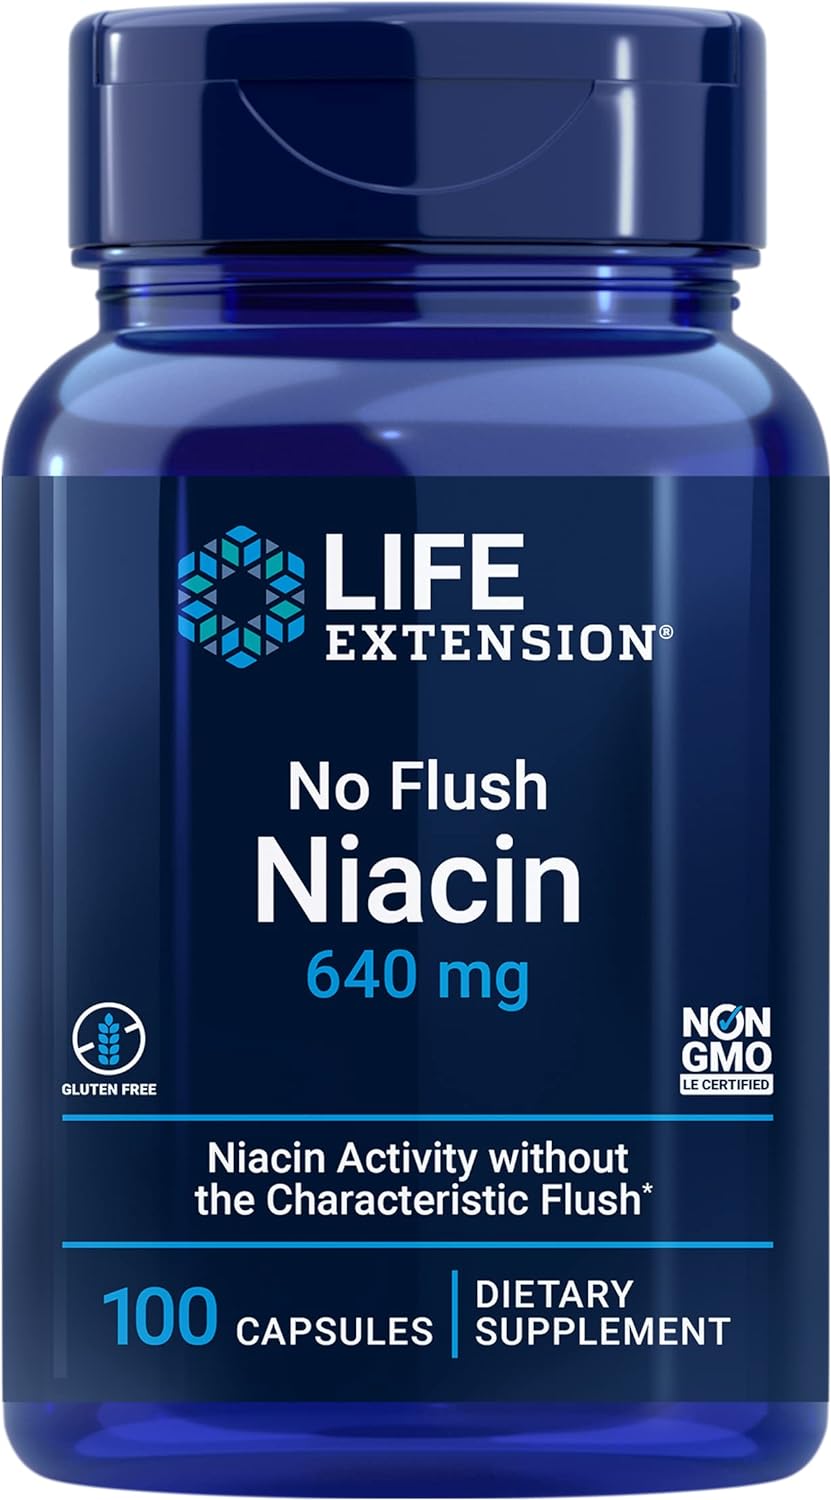 Life Extension No Flush Niacin 640 mg - Flush Free Vitamin B Supplement with Inositol for Healthy Metabolism and Cholesterol Management – Non-GMO, Gluten-Free - 100 Capsules